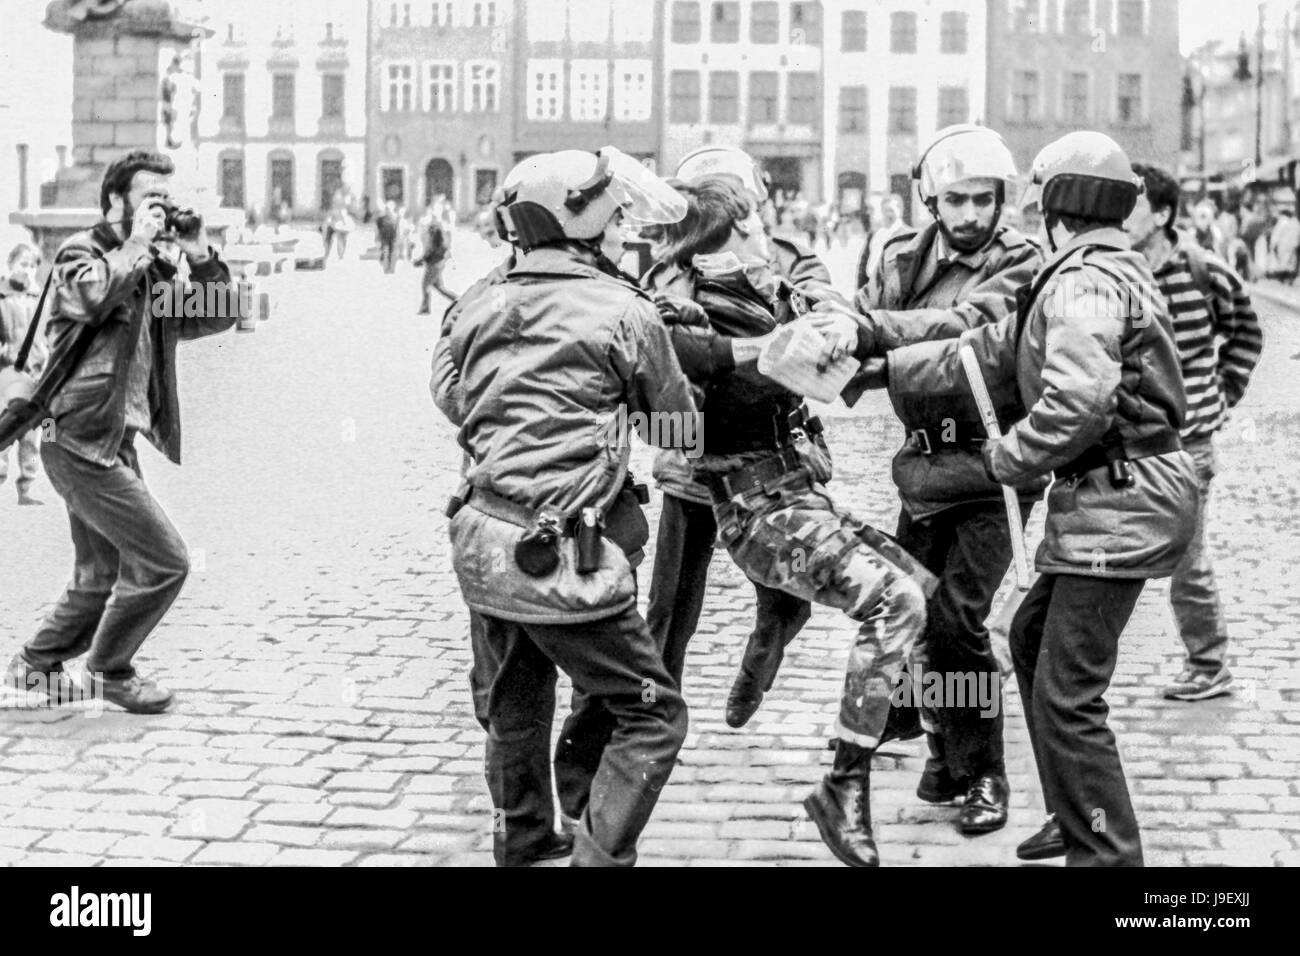 Street protests in Poland 1989-1990, militia - special police forces.(ZOMO). Fight for democracy and freedom, polish revolution Stock Photo